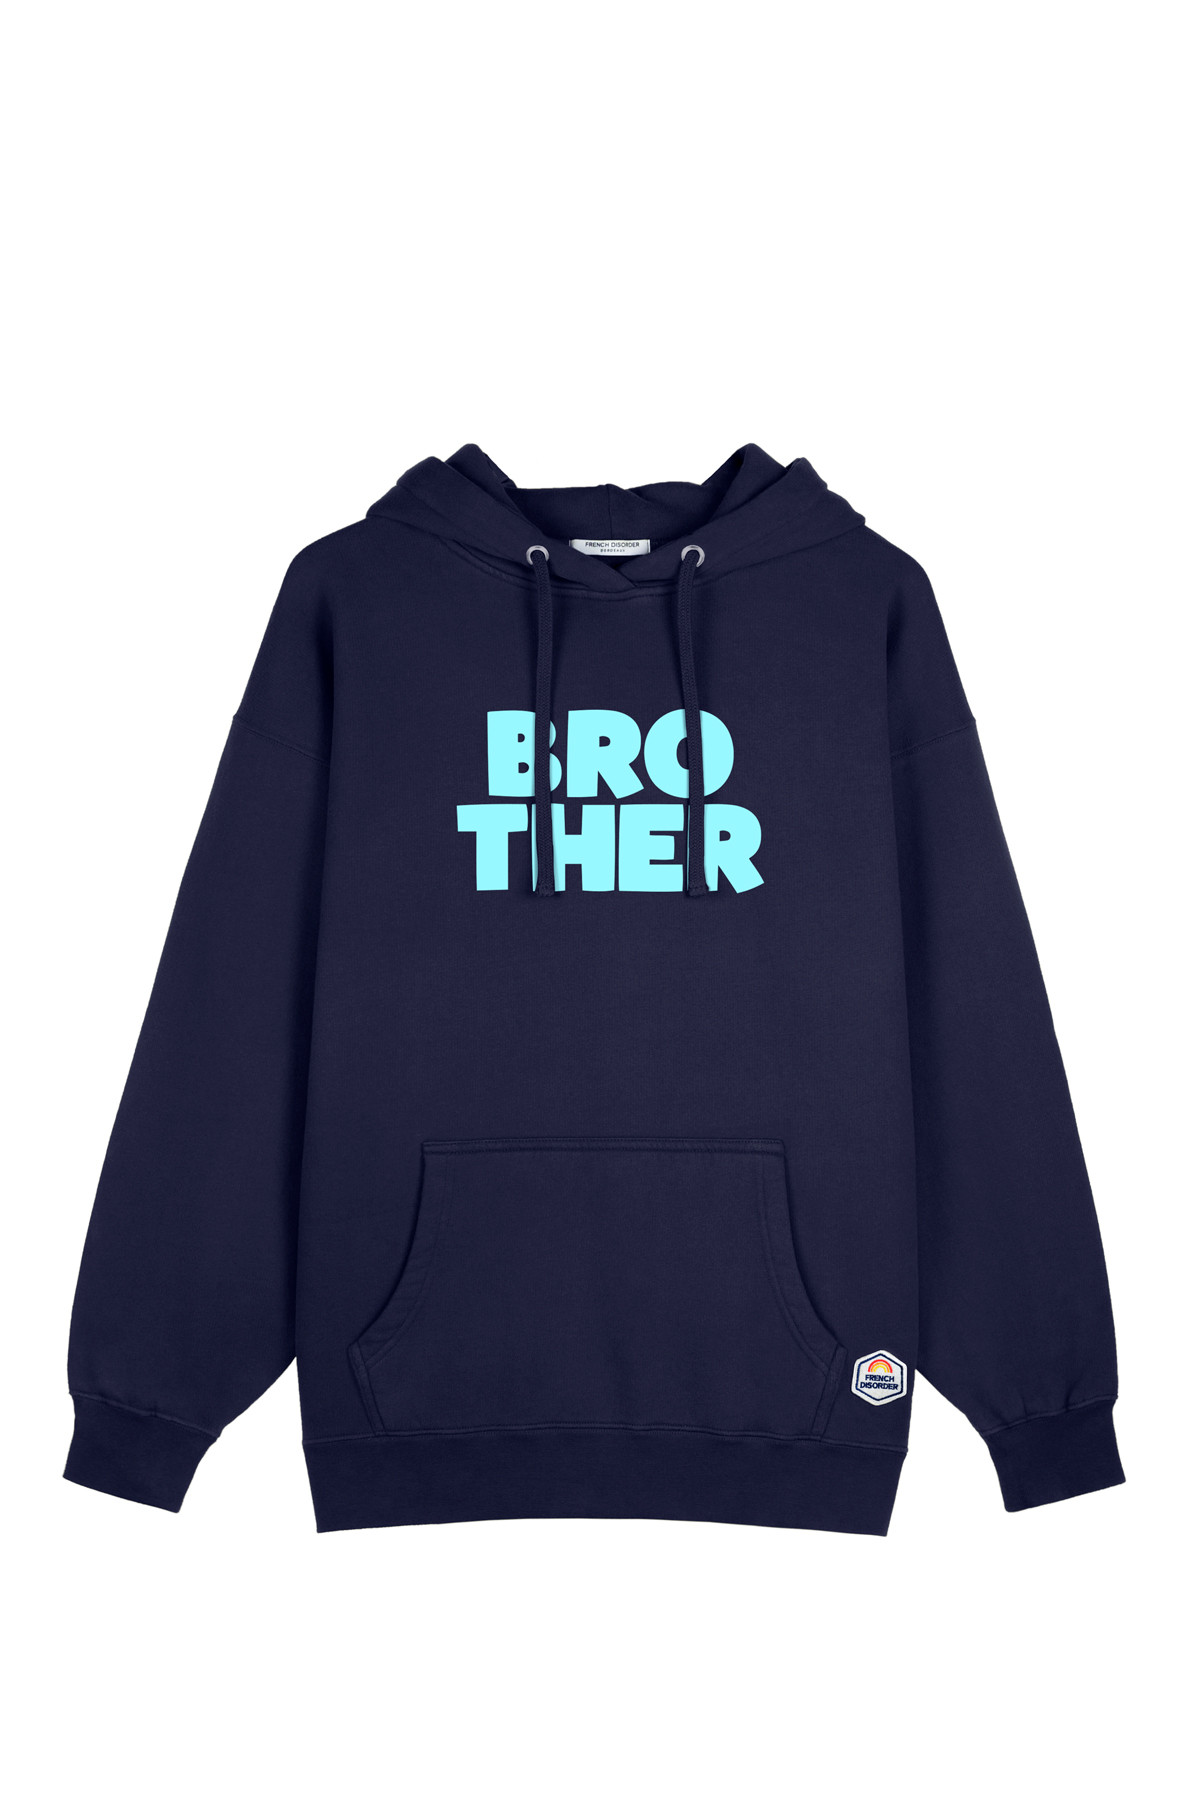 Photo de SWEATS À CAPUCHE Hoodie Kids BROTHER chez French Disorder